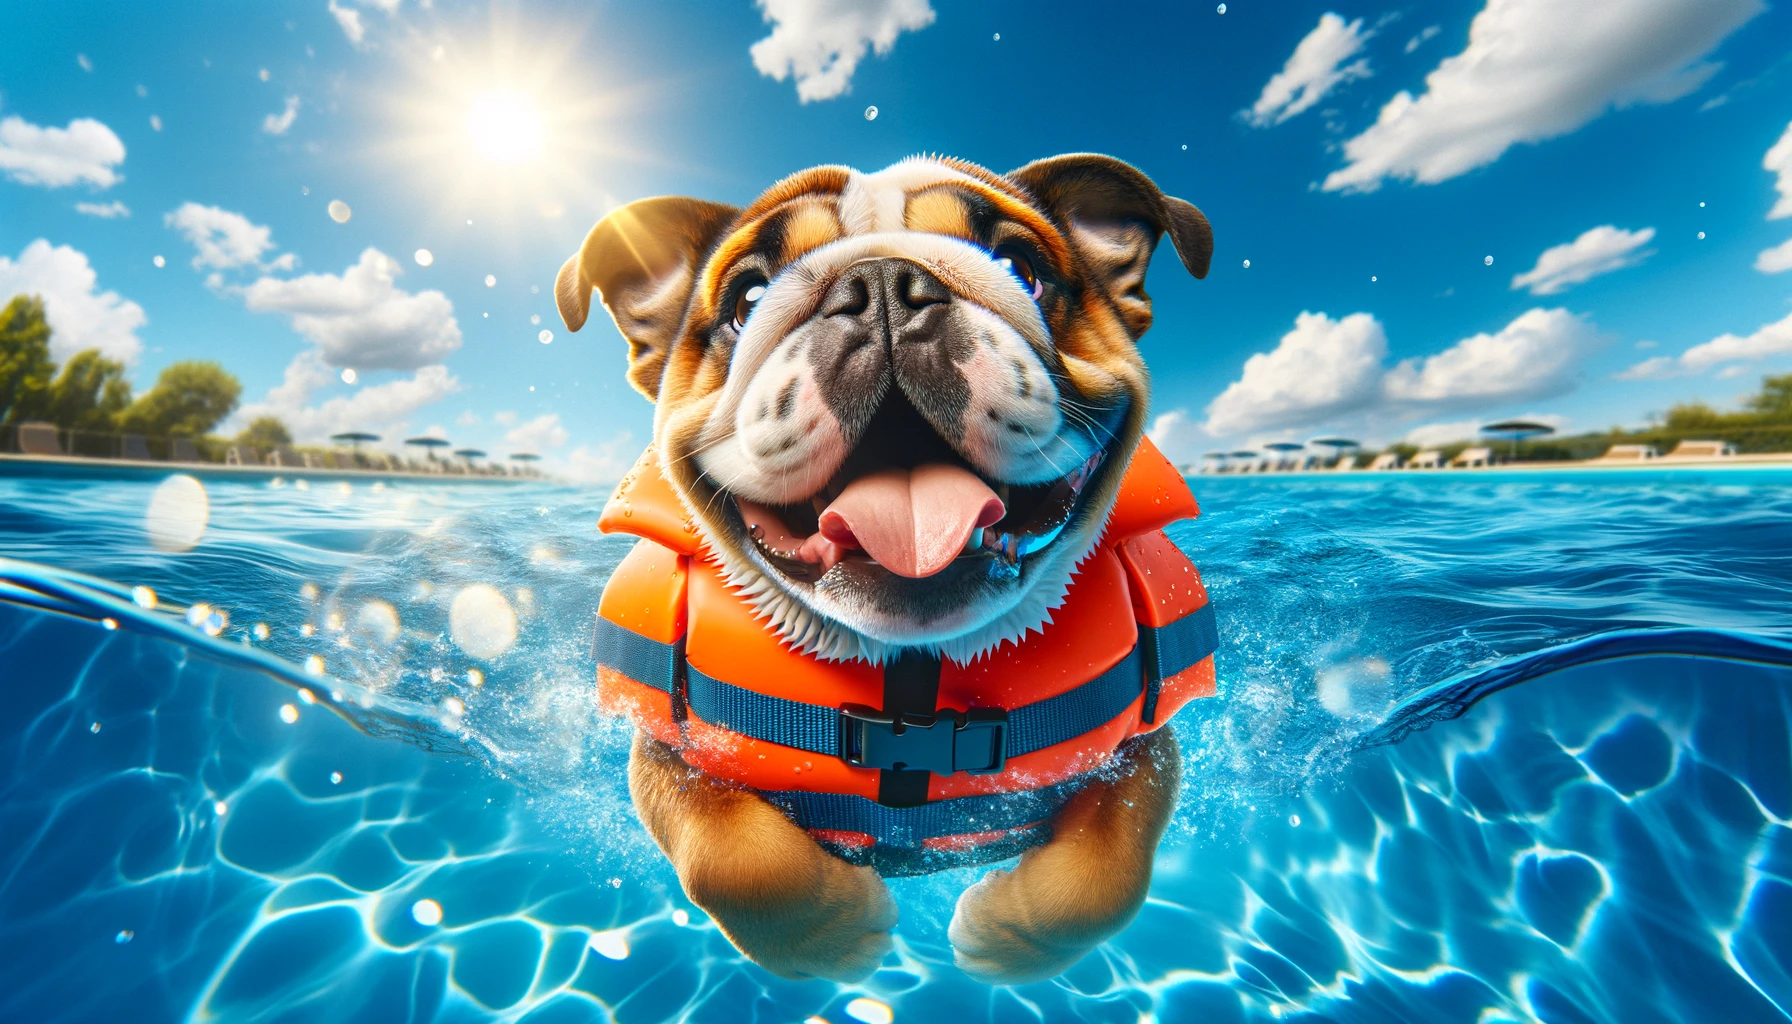 A wide image of a cheerful bulldog wearing a bright orange life vest, swimming in a clear blue pool under a sunny sky. The bulldog looks extremely happy and secure with its life vest on, its tongue out and ears flapping as it confidently paddles through the water. The sunlight reflects off the water, creating a sparkling effect around the dog. The background features a few fluffy white clouds in a bright blue sky, enhancing the joyful and safe swimming experience.